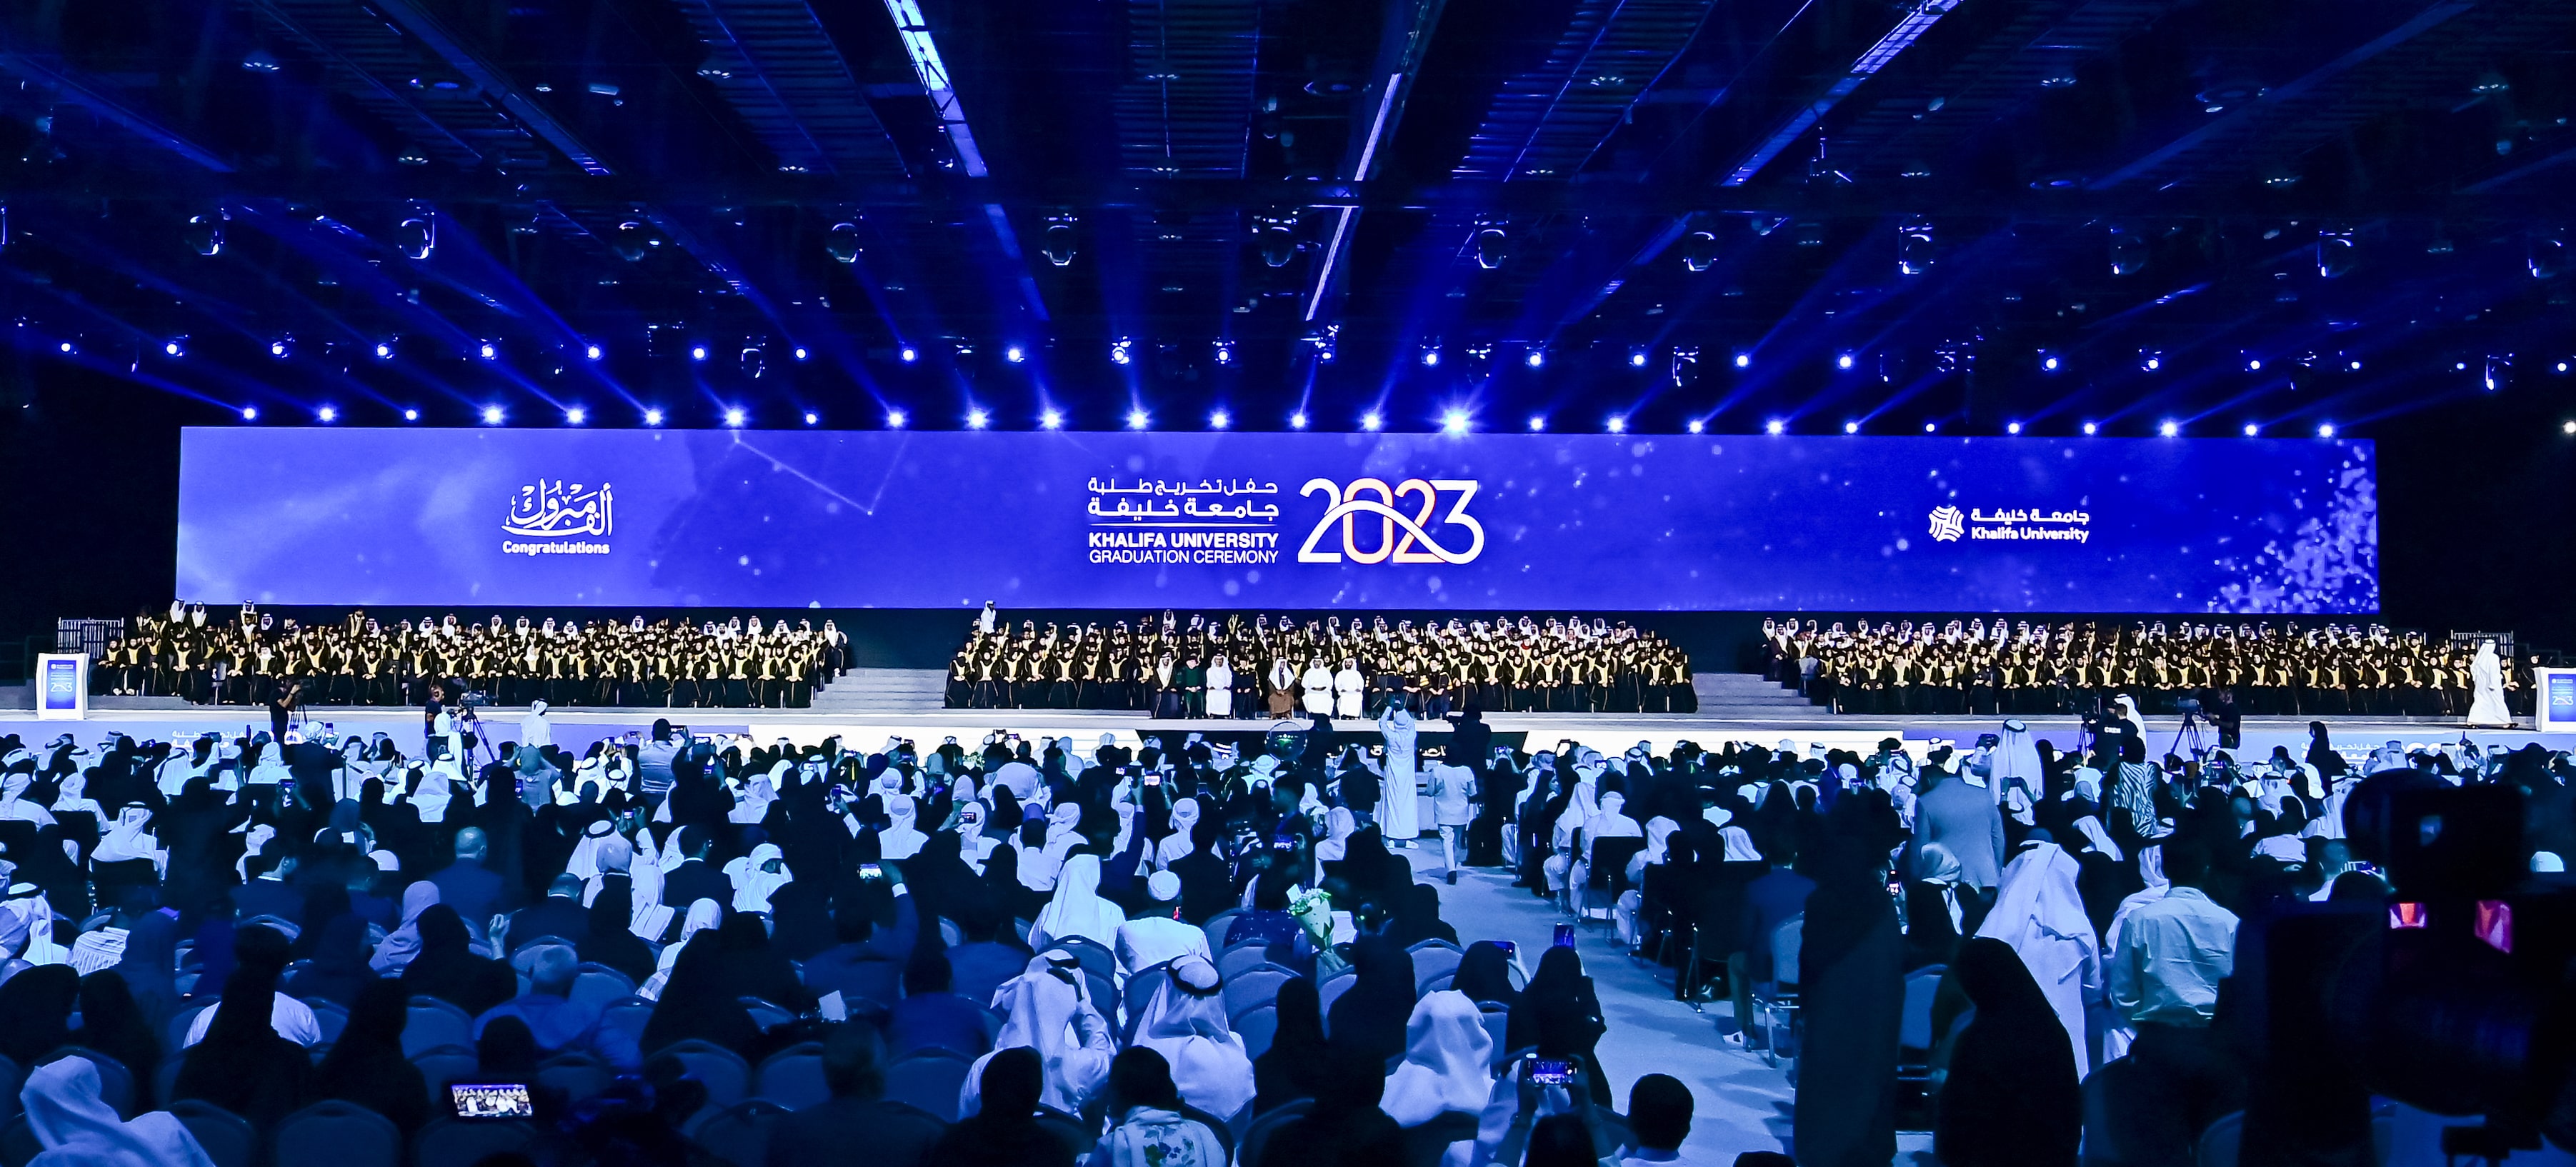 During Khalifa University Annual Graduation Ceremony 2023<br>549 Bachelor, Master’s and PhD Students Conferred Degrees by H.E. Sheikh Nahyan bin Mubarak